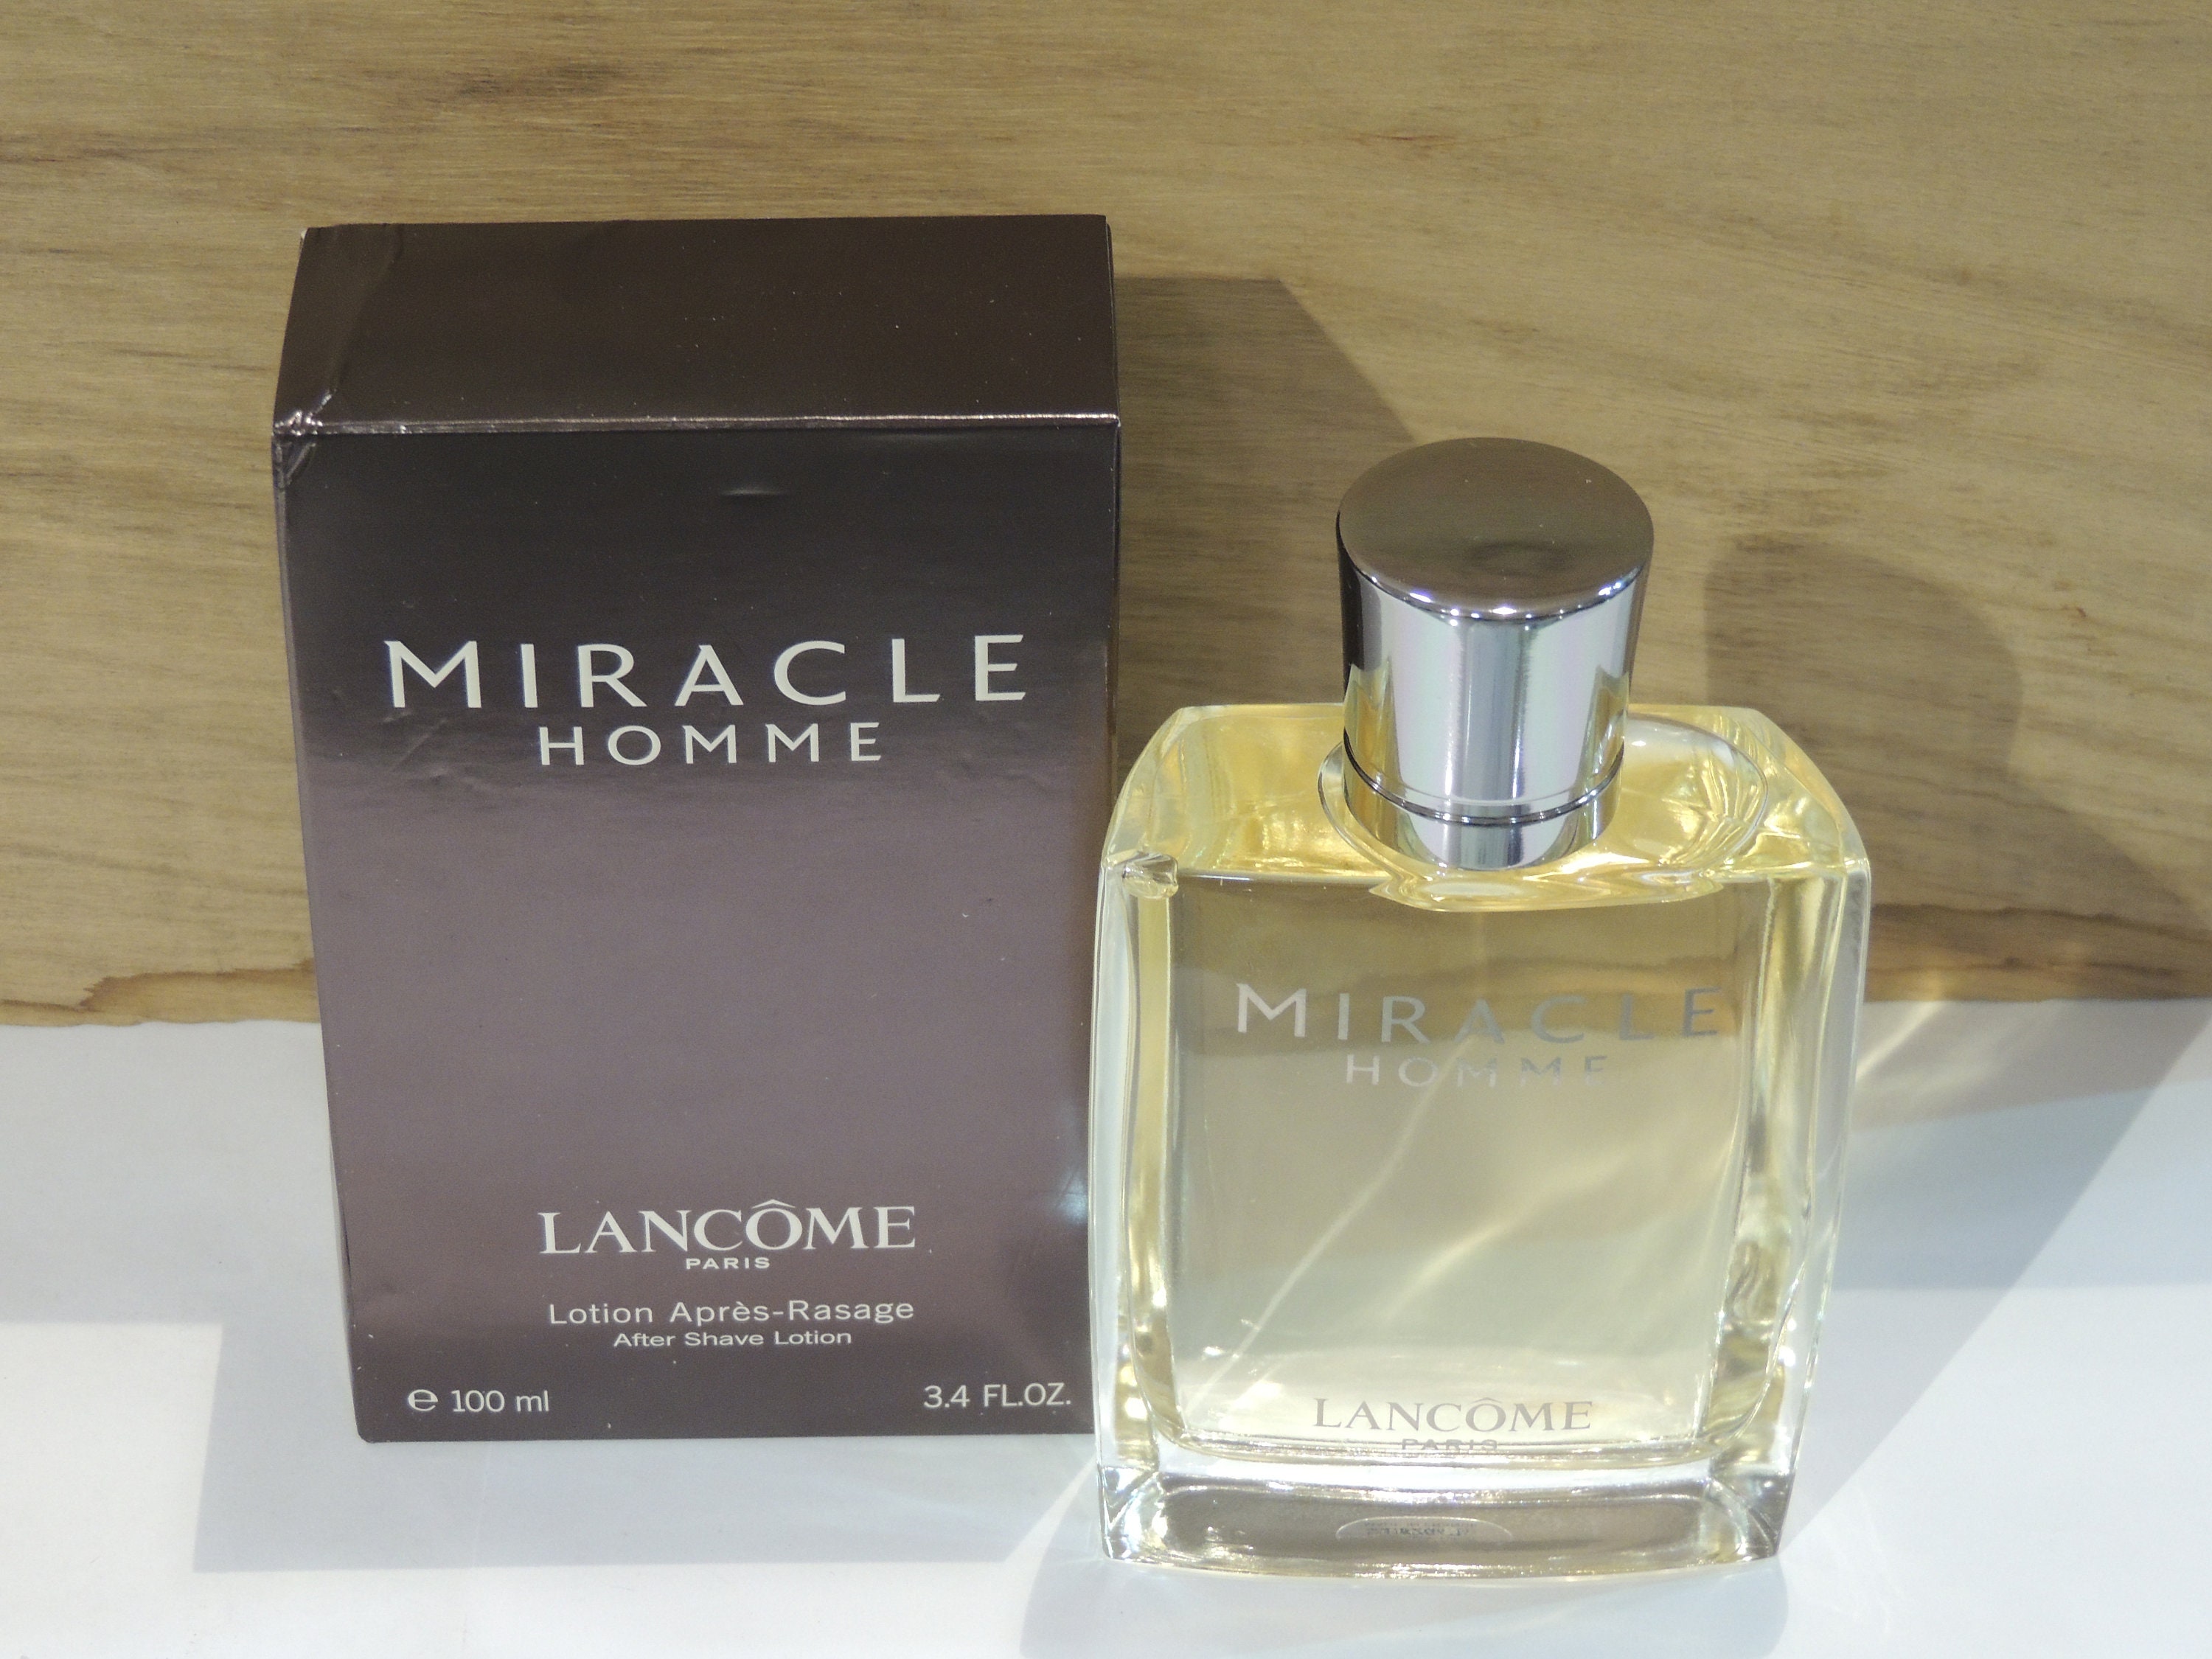 Lancome homme. Lancome Miracle homme. Ланком homme.